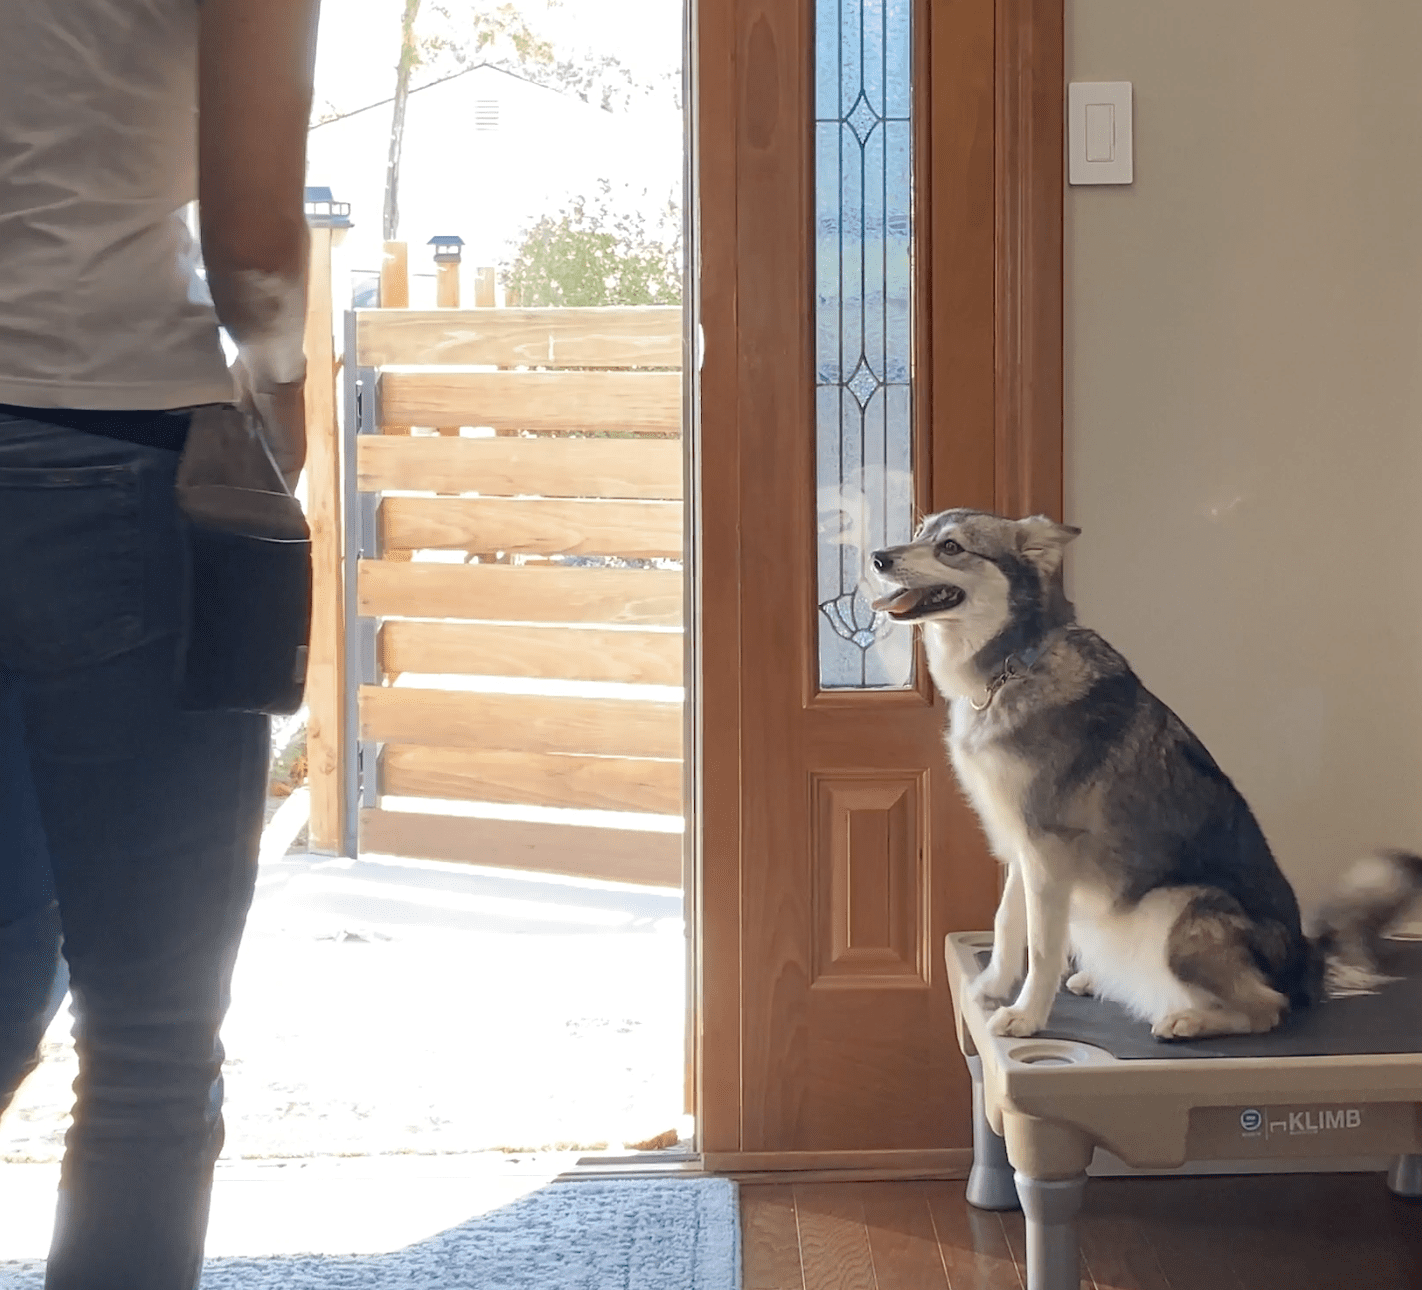 How to stop your dog from running out the door - Nicole Ellis